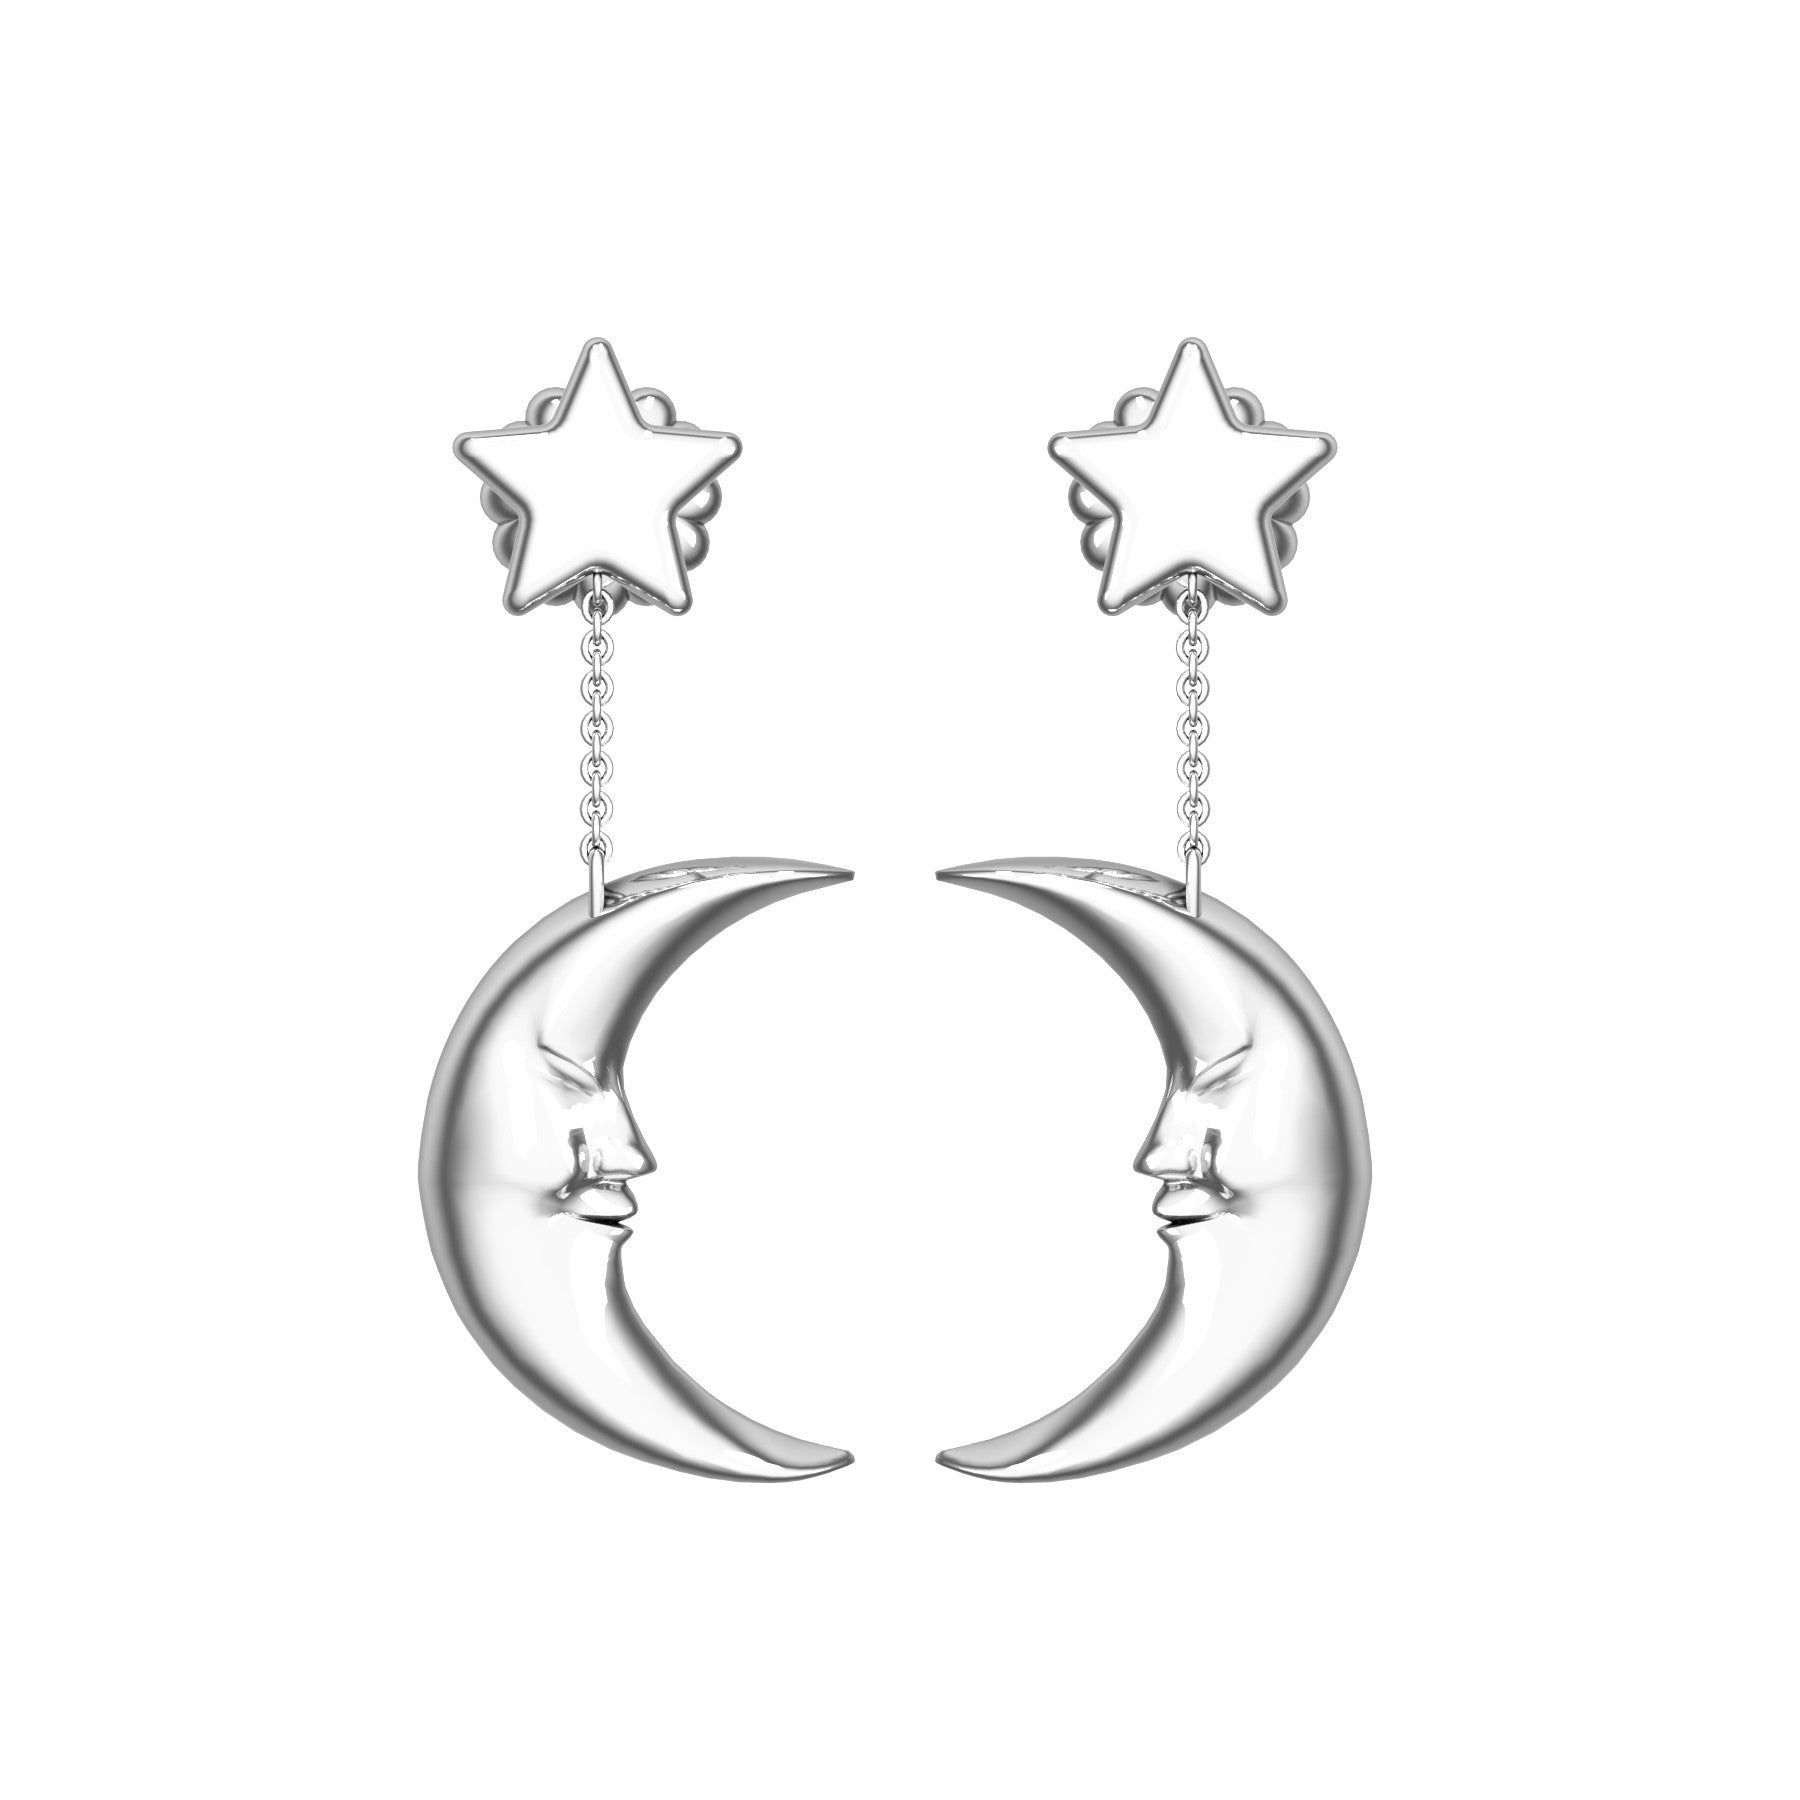 moon earrings, 18 K white gold, weight about 5,4 g (0.19 oz), length 36,5 mm